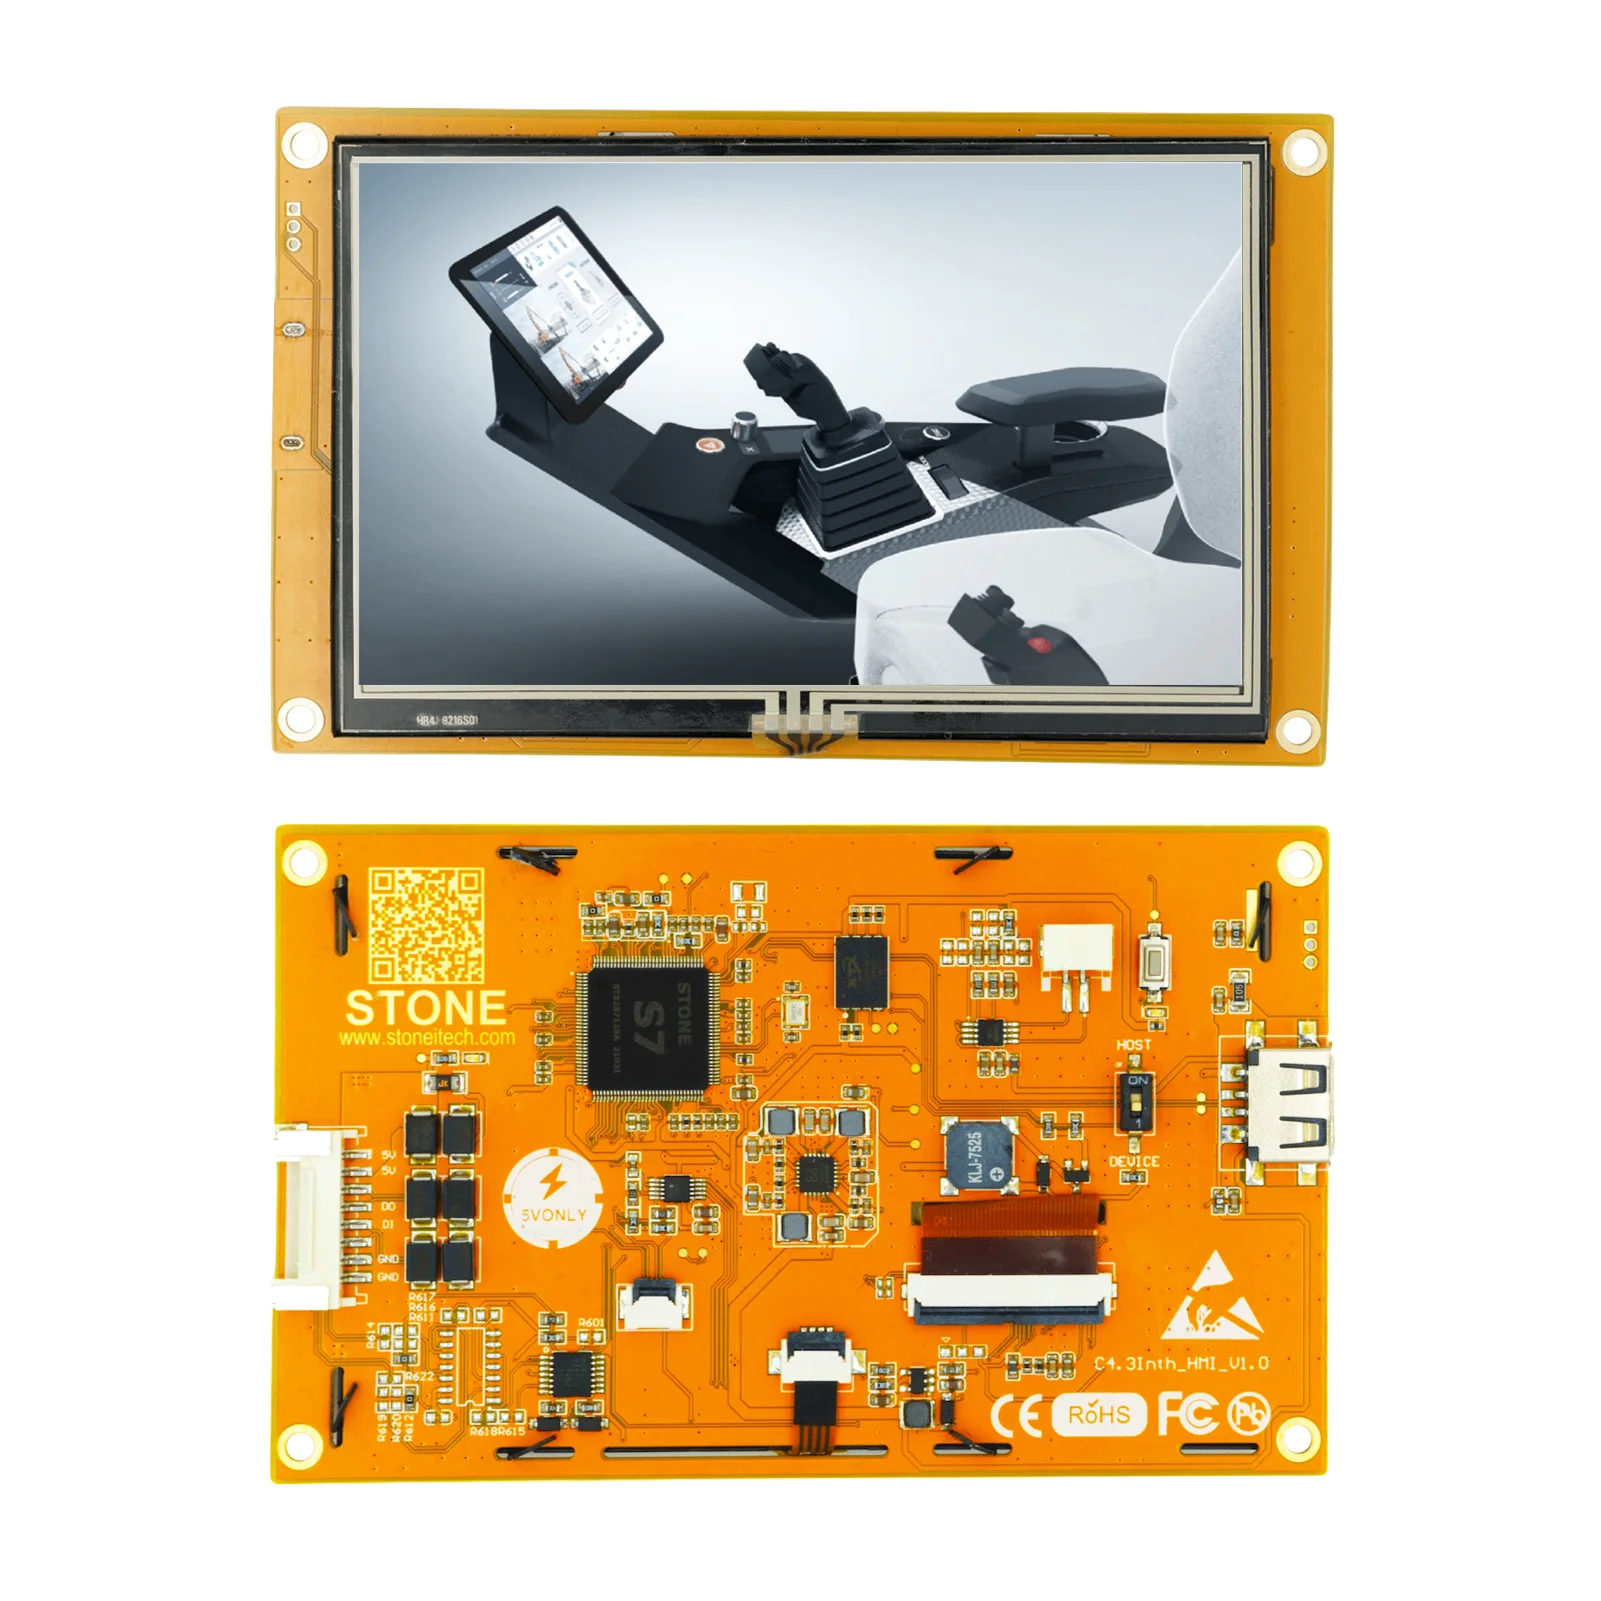 4.3 inch with Touch Panel HMI Graphic LCD Display Module Support for ESP32 MCU/Raspberry Pi